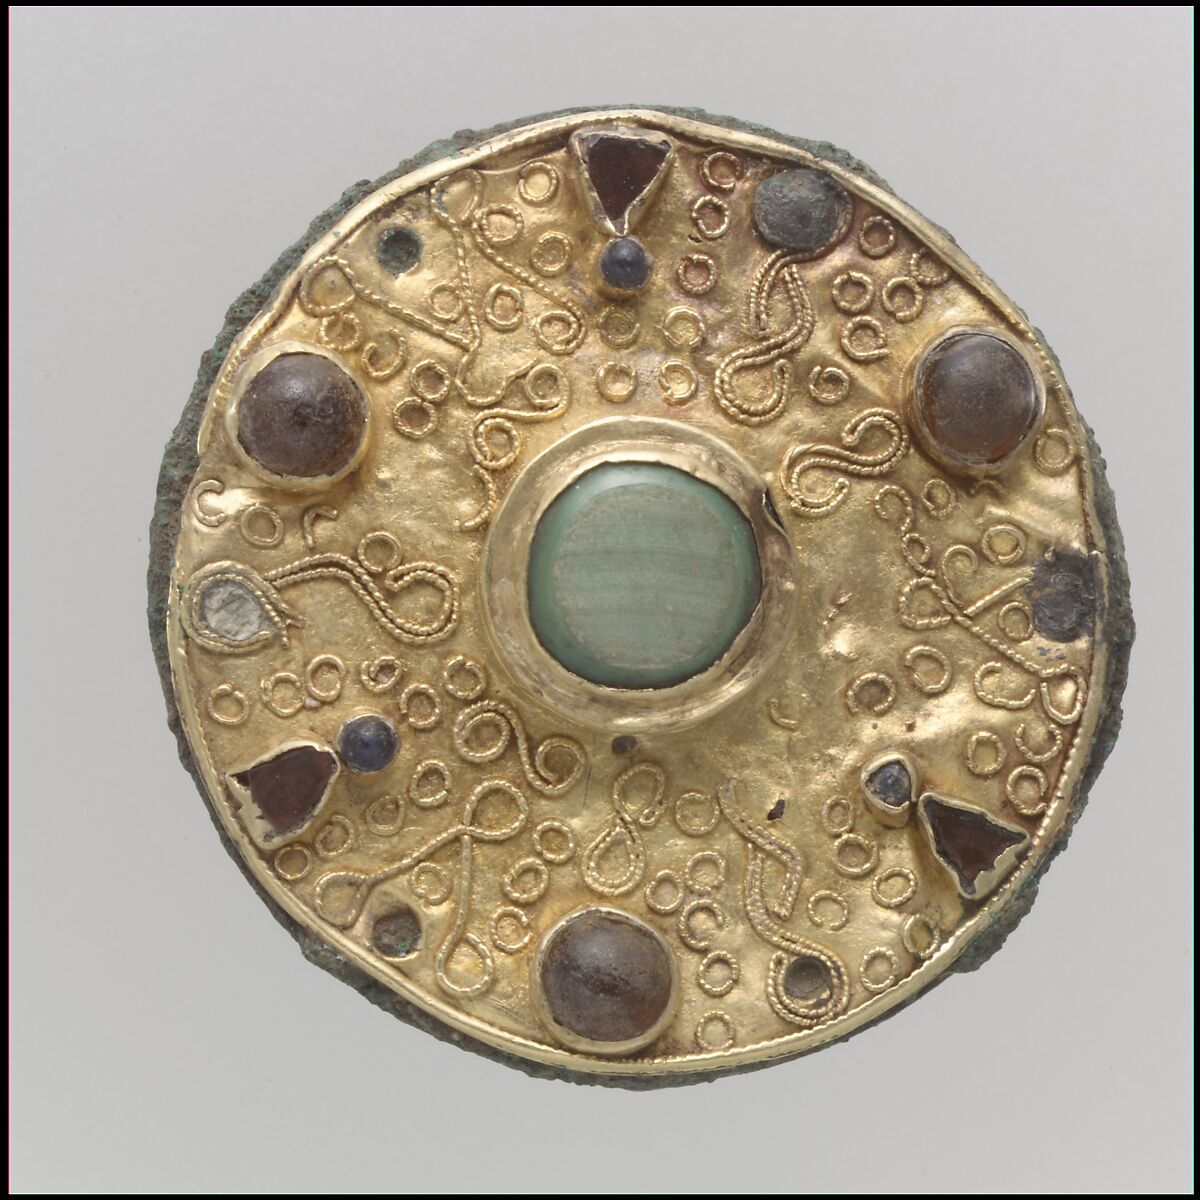 Disk Brooch, Copper alloy, coated with gold, iron pin, glass paste & glass paste cabochons, Frankish 